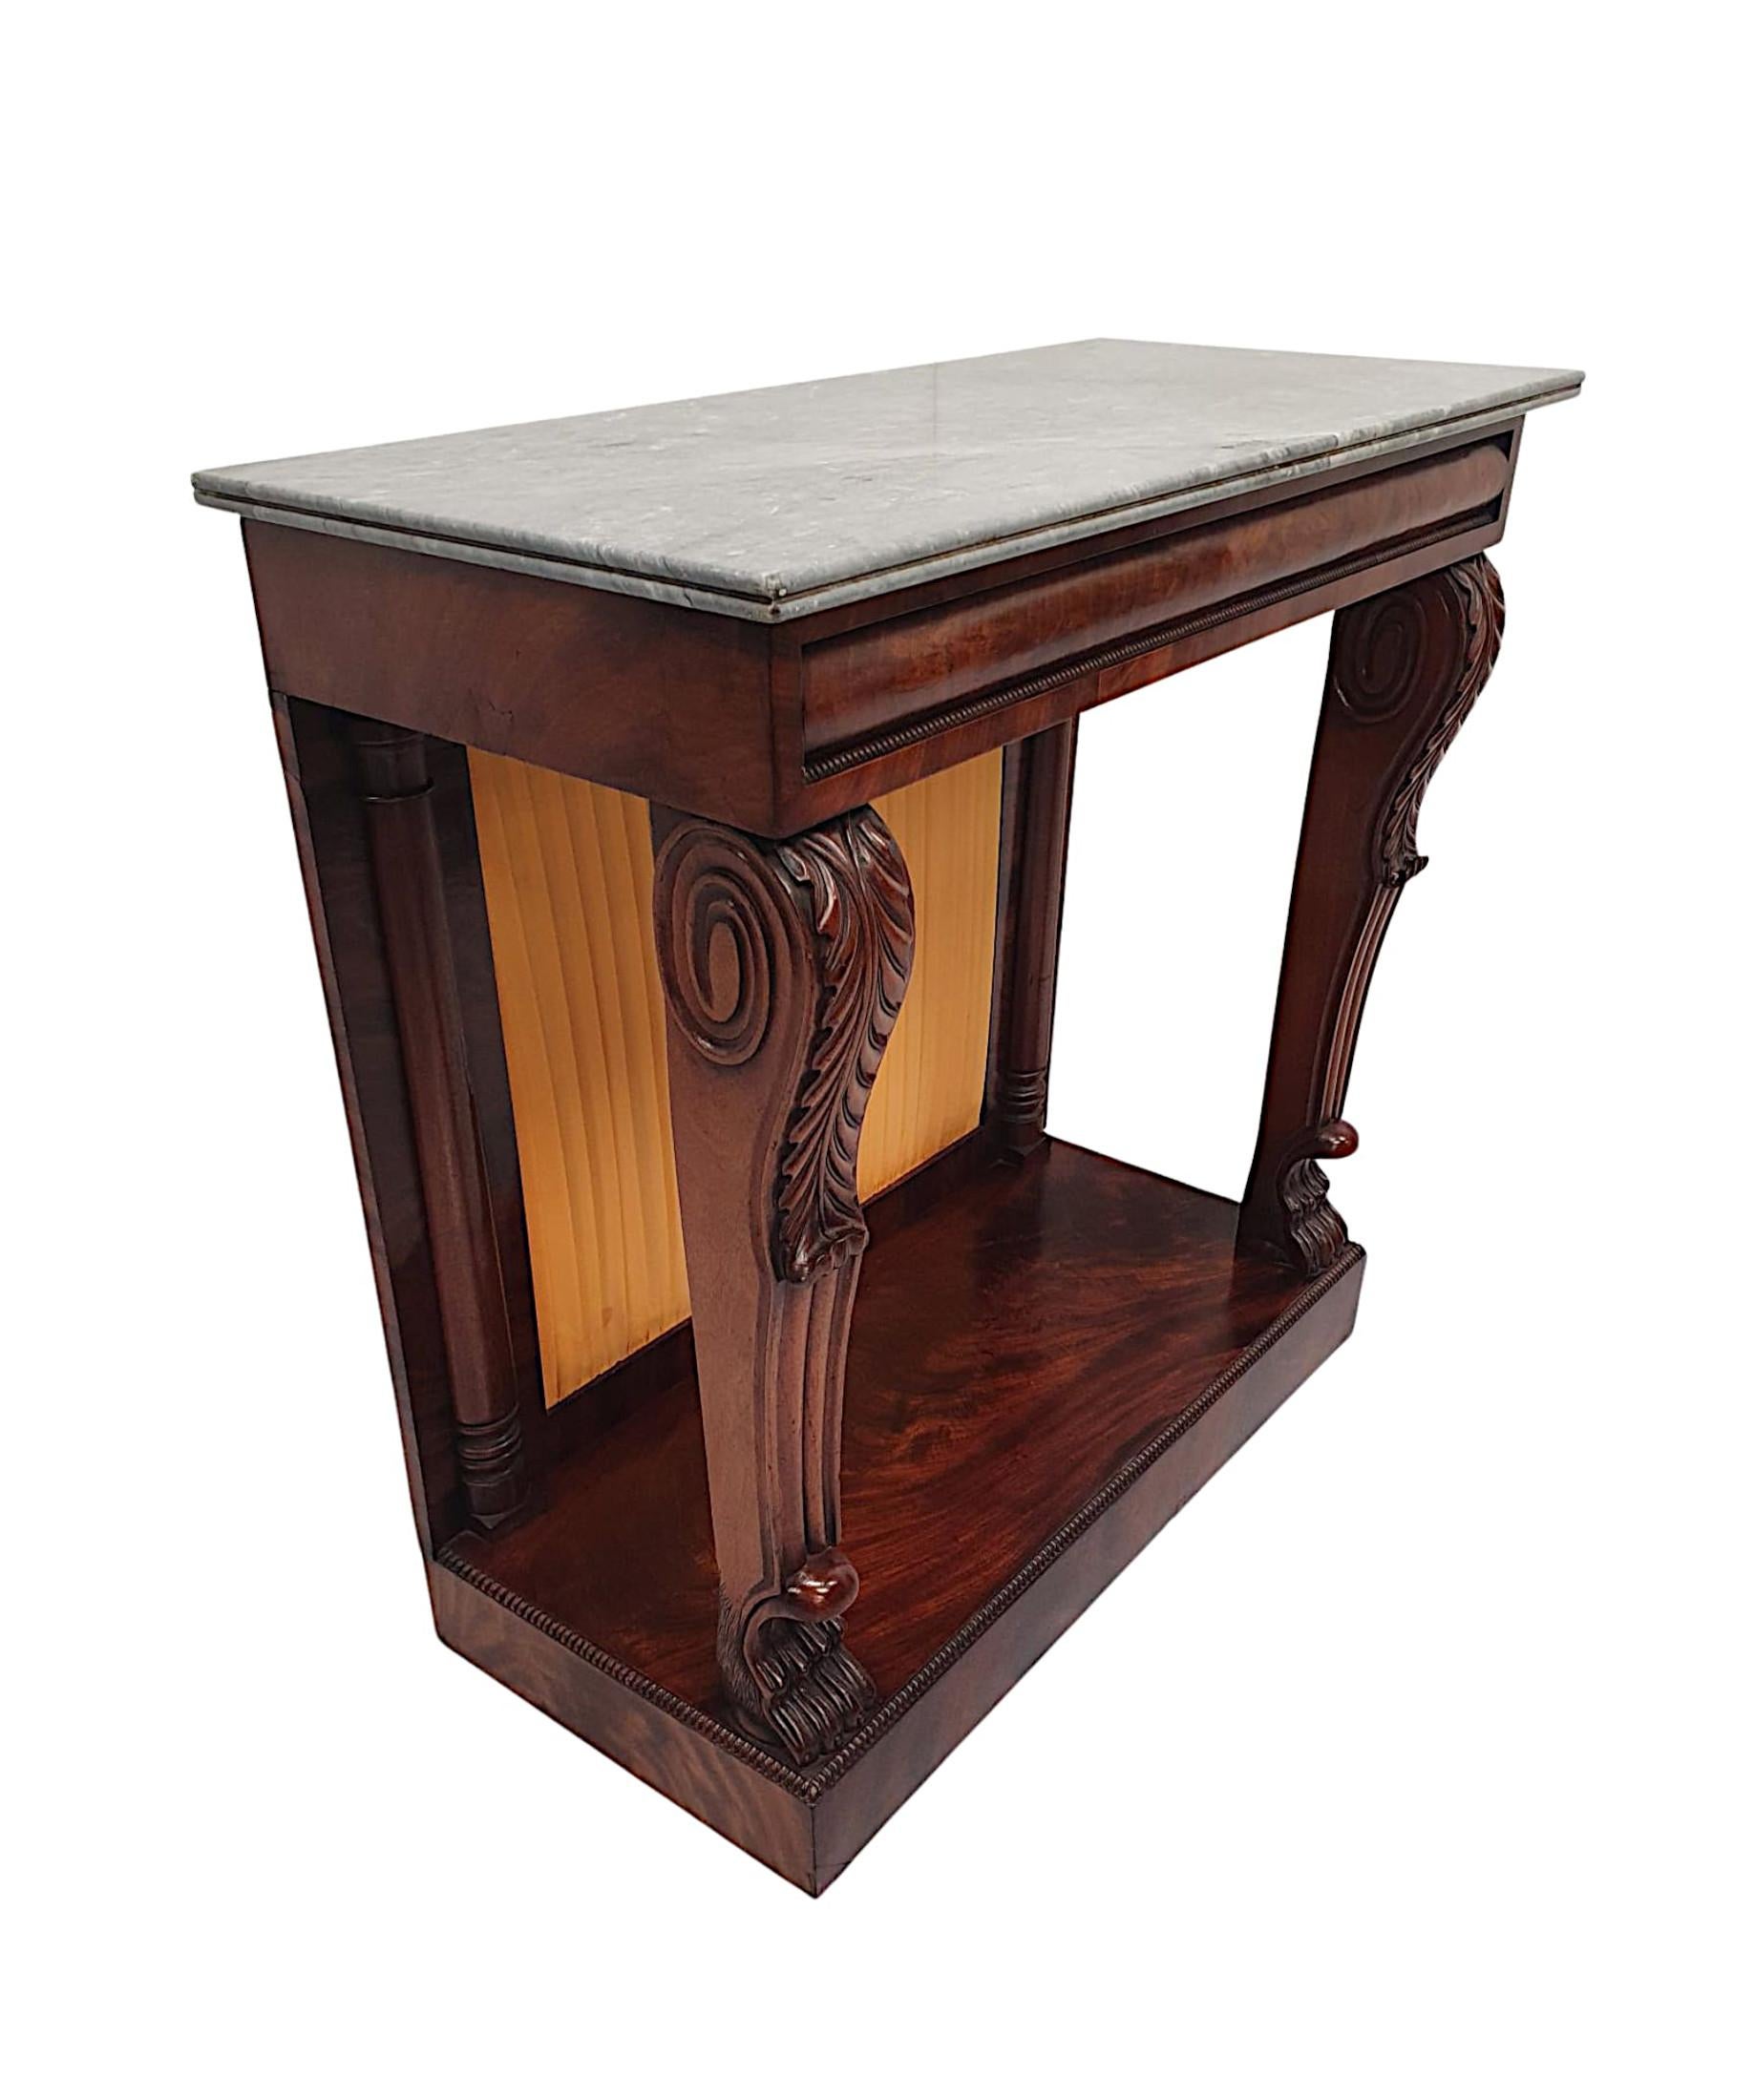 English Rare 19th Century Marble Top Console Table For Sale